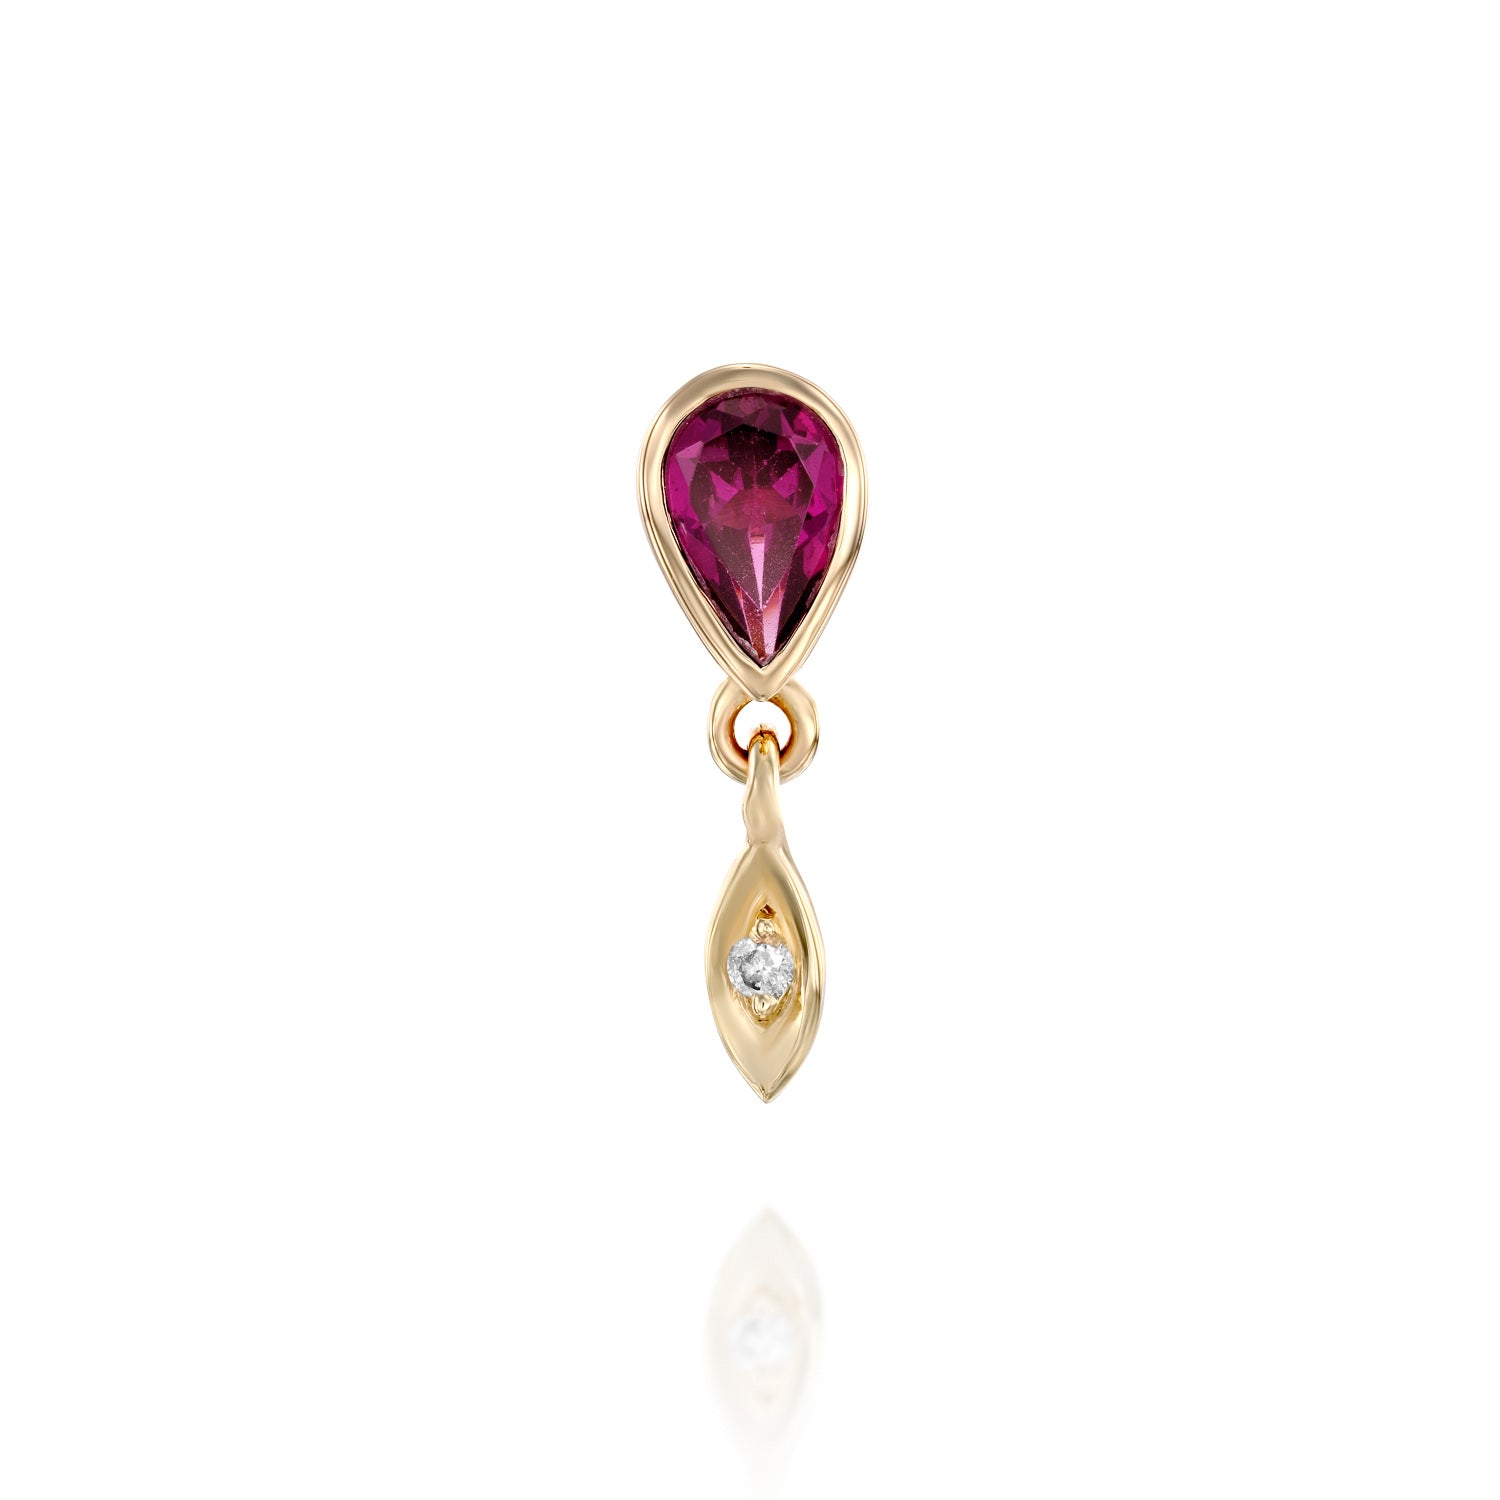 Indrani Earring &amp; Pink Tourmaline  - one of a kind - Danielle Gerber Freedom Jewelry